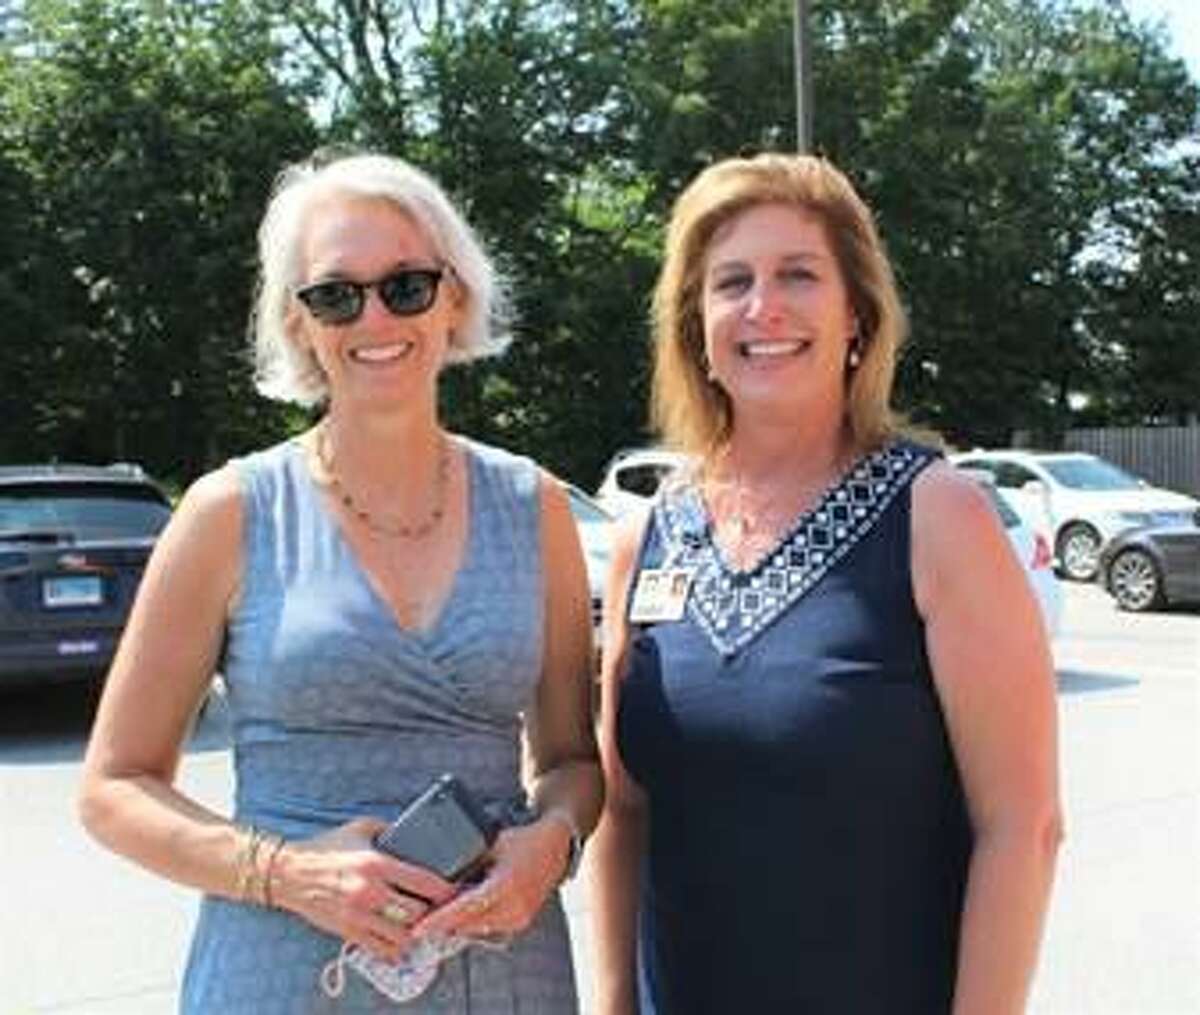 Community Health & Wellness Center in Torrington and Winsted held a community celebration Aug. 11, in recognition of National Health Week. Pictured are state Rep. Maria Horn, D-Salisbury, left, and CHWC CEO Joanne Borduas.